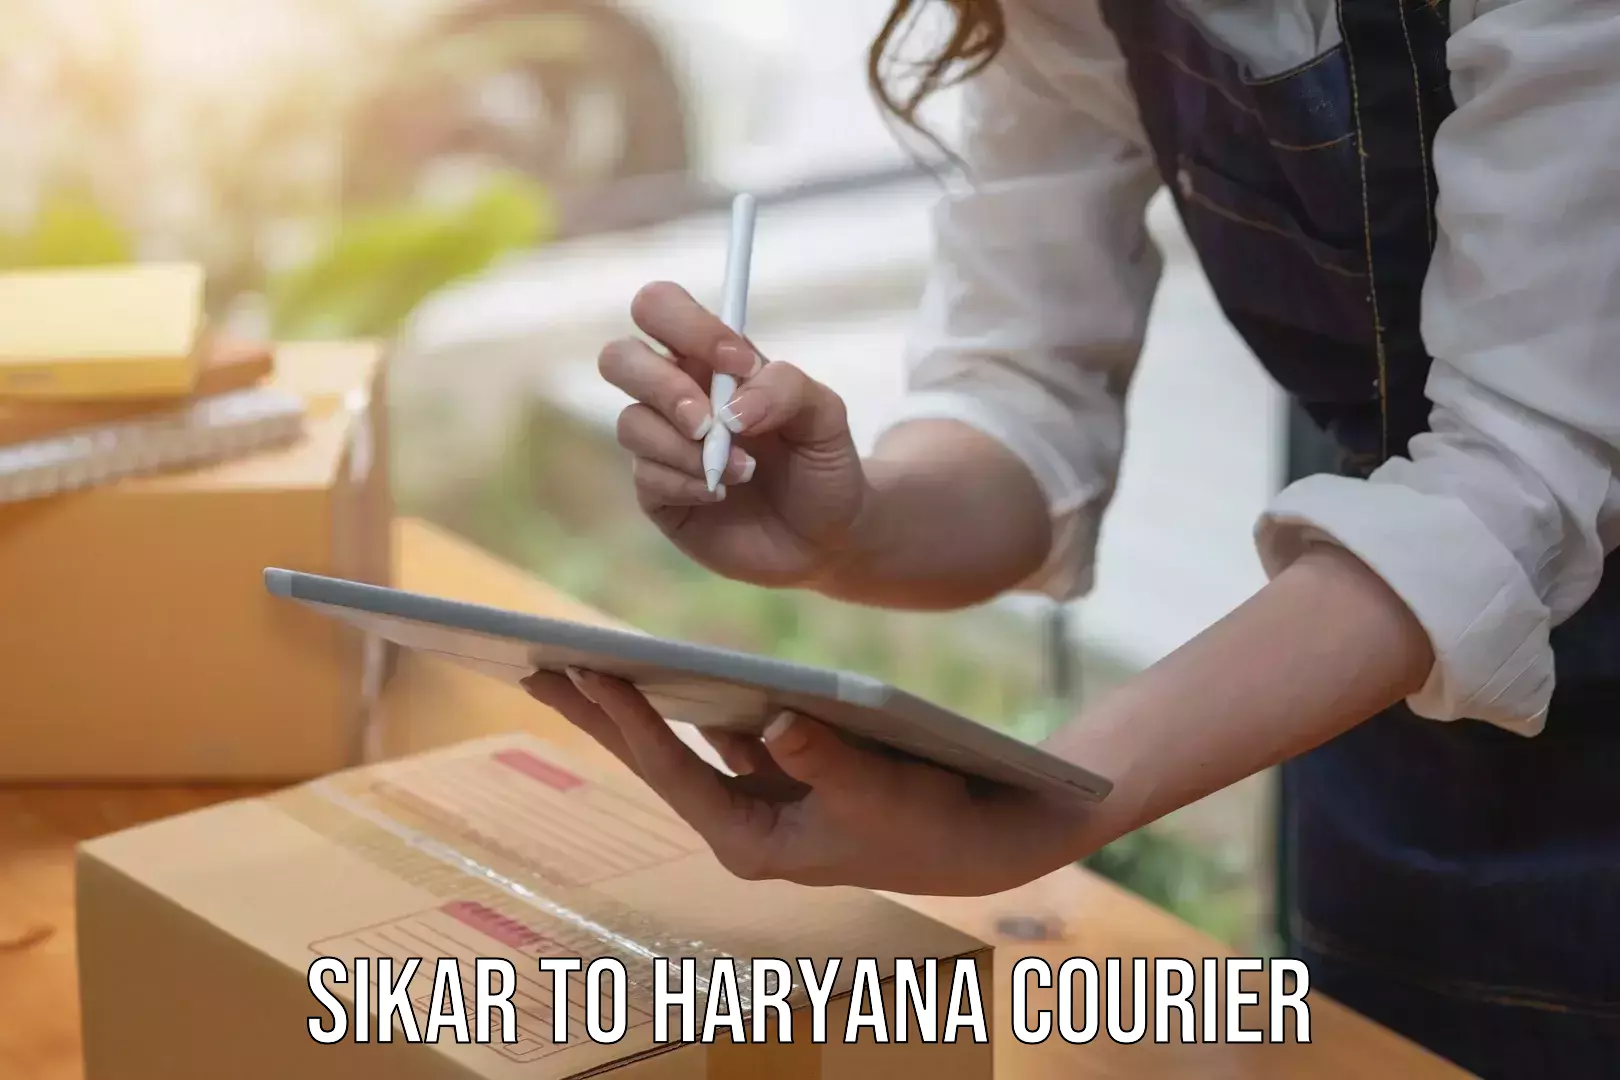 Courier app Sikar to Fatehabad